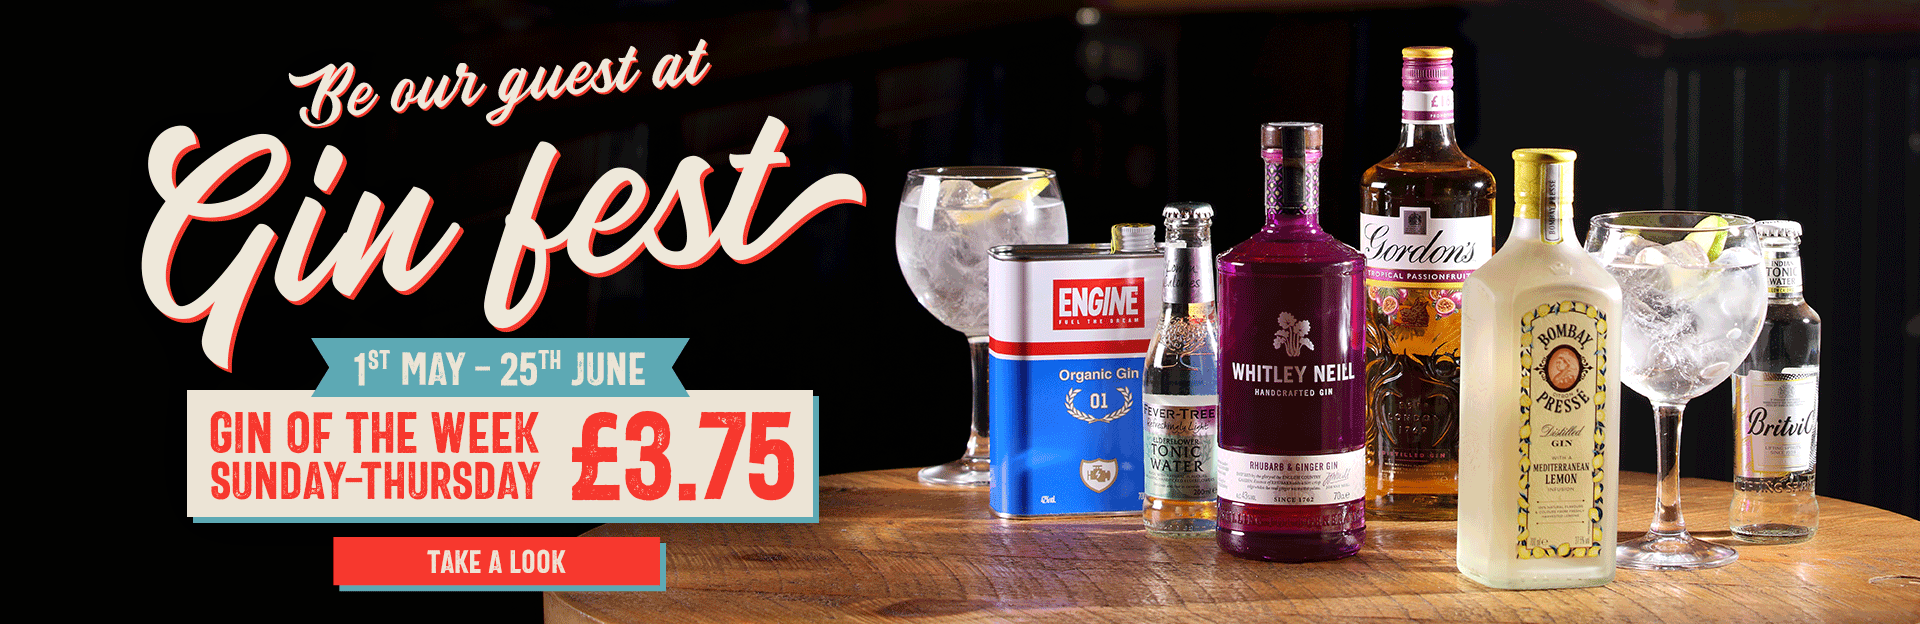 Gin Fest at O'Neill's Printworks